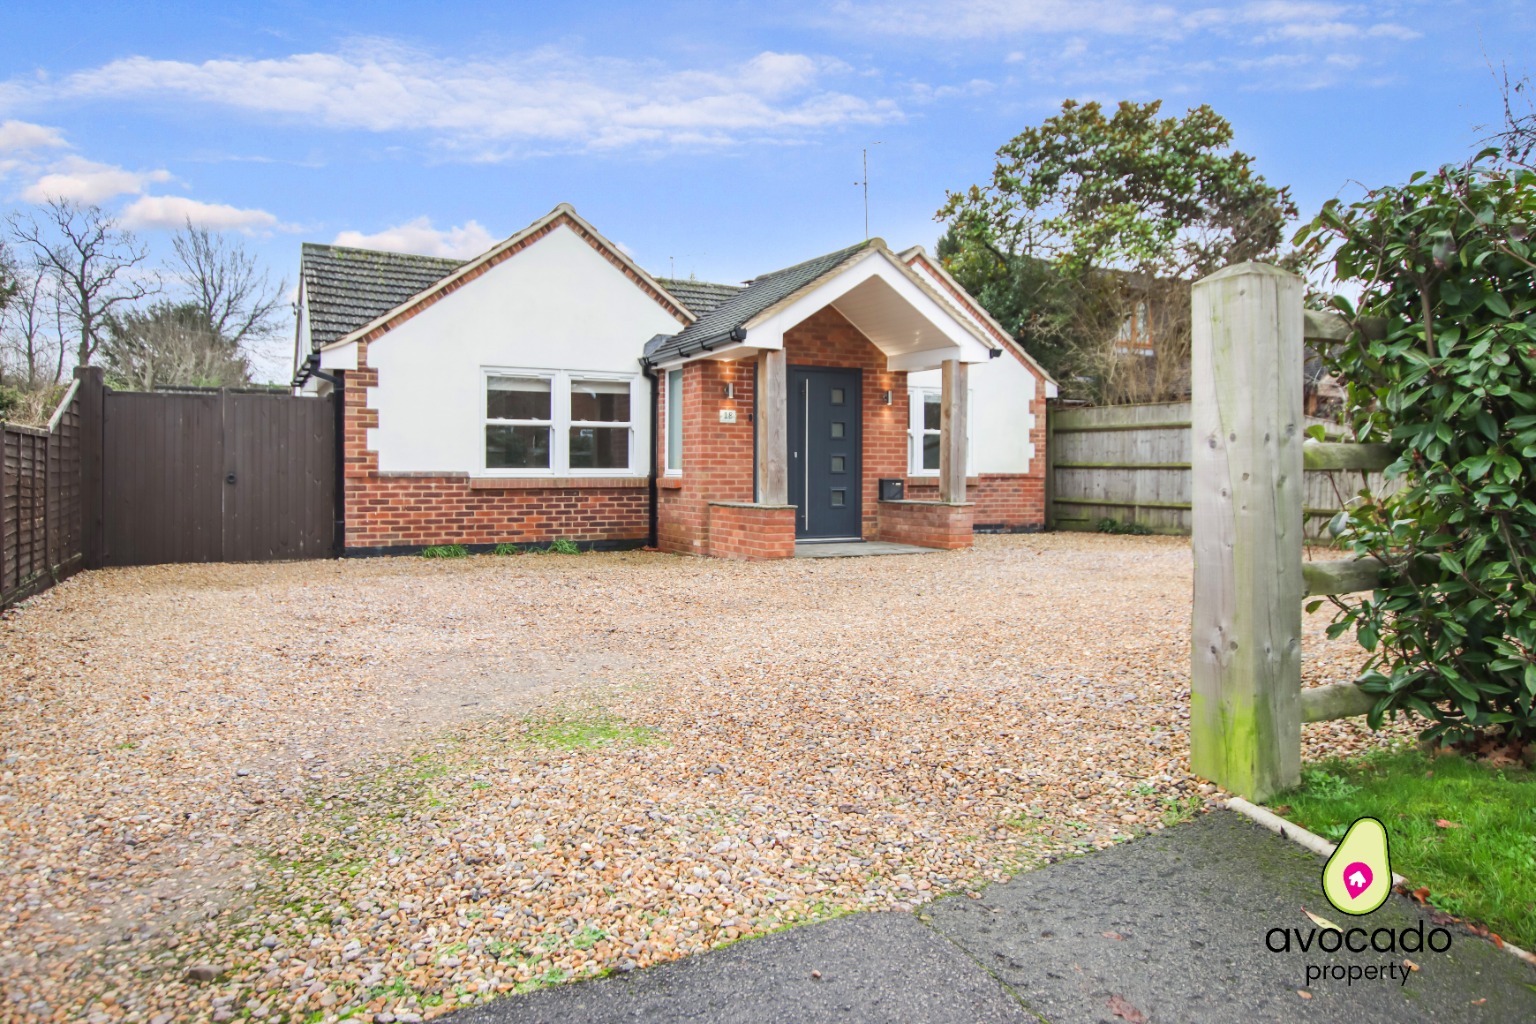 5 bed bungalow for sale in Darby Green Lane, Camberley  - Property Image 1